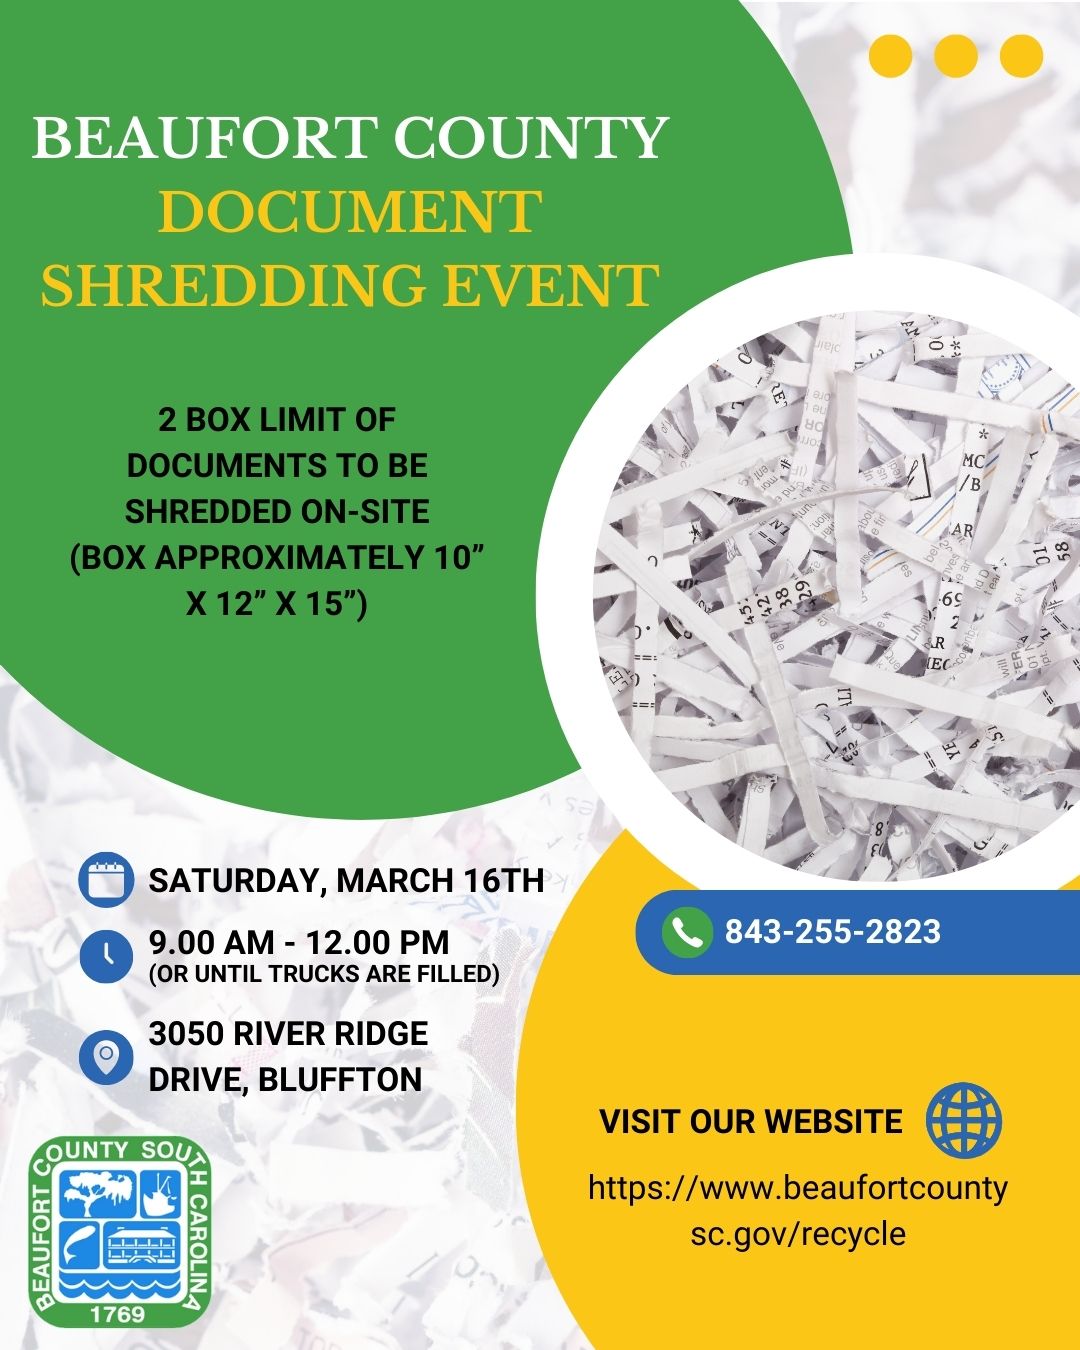 Beaufort County Offers Free Secure Shredding Event in Bluffton Saturday, March 16